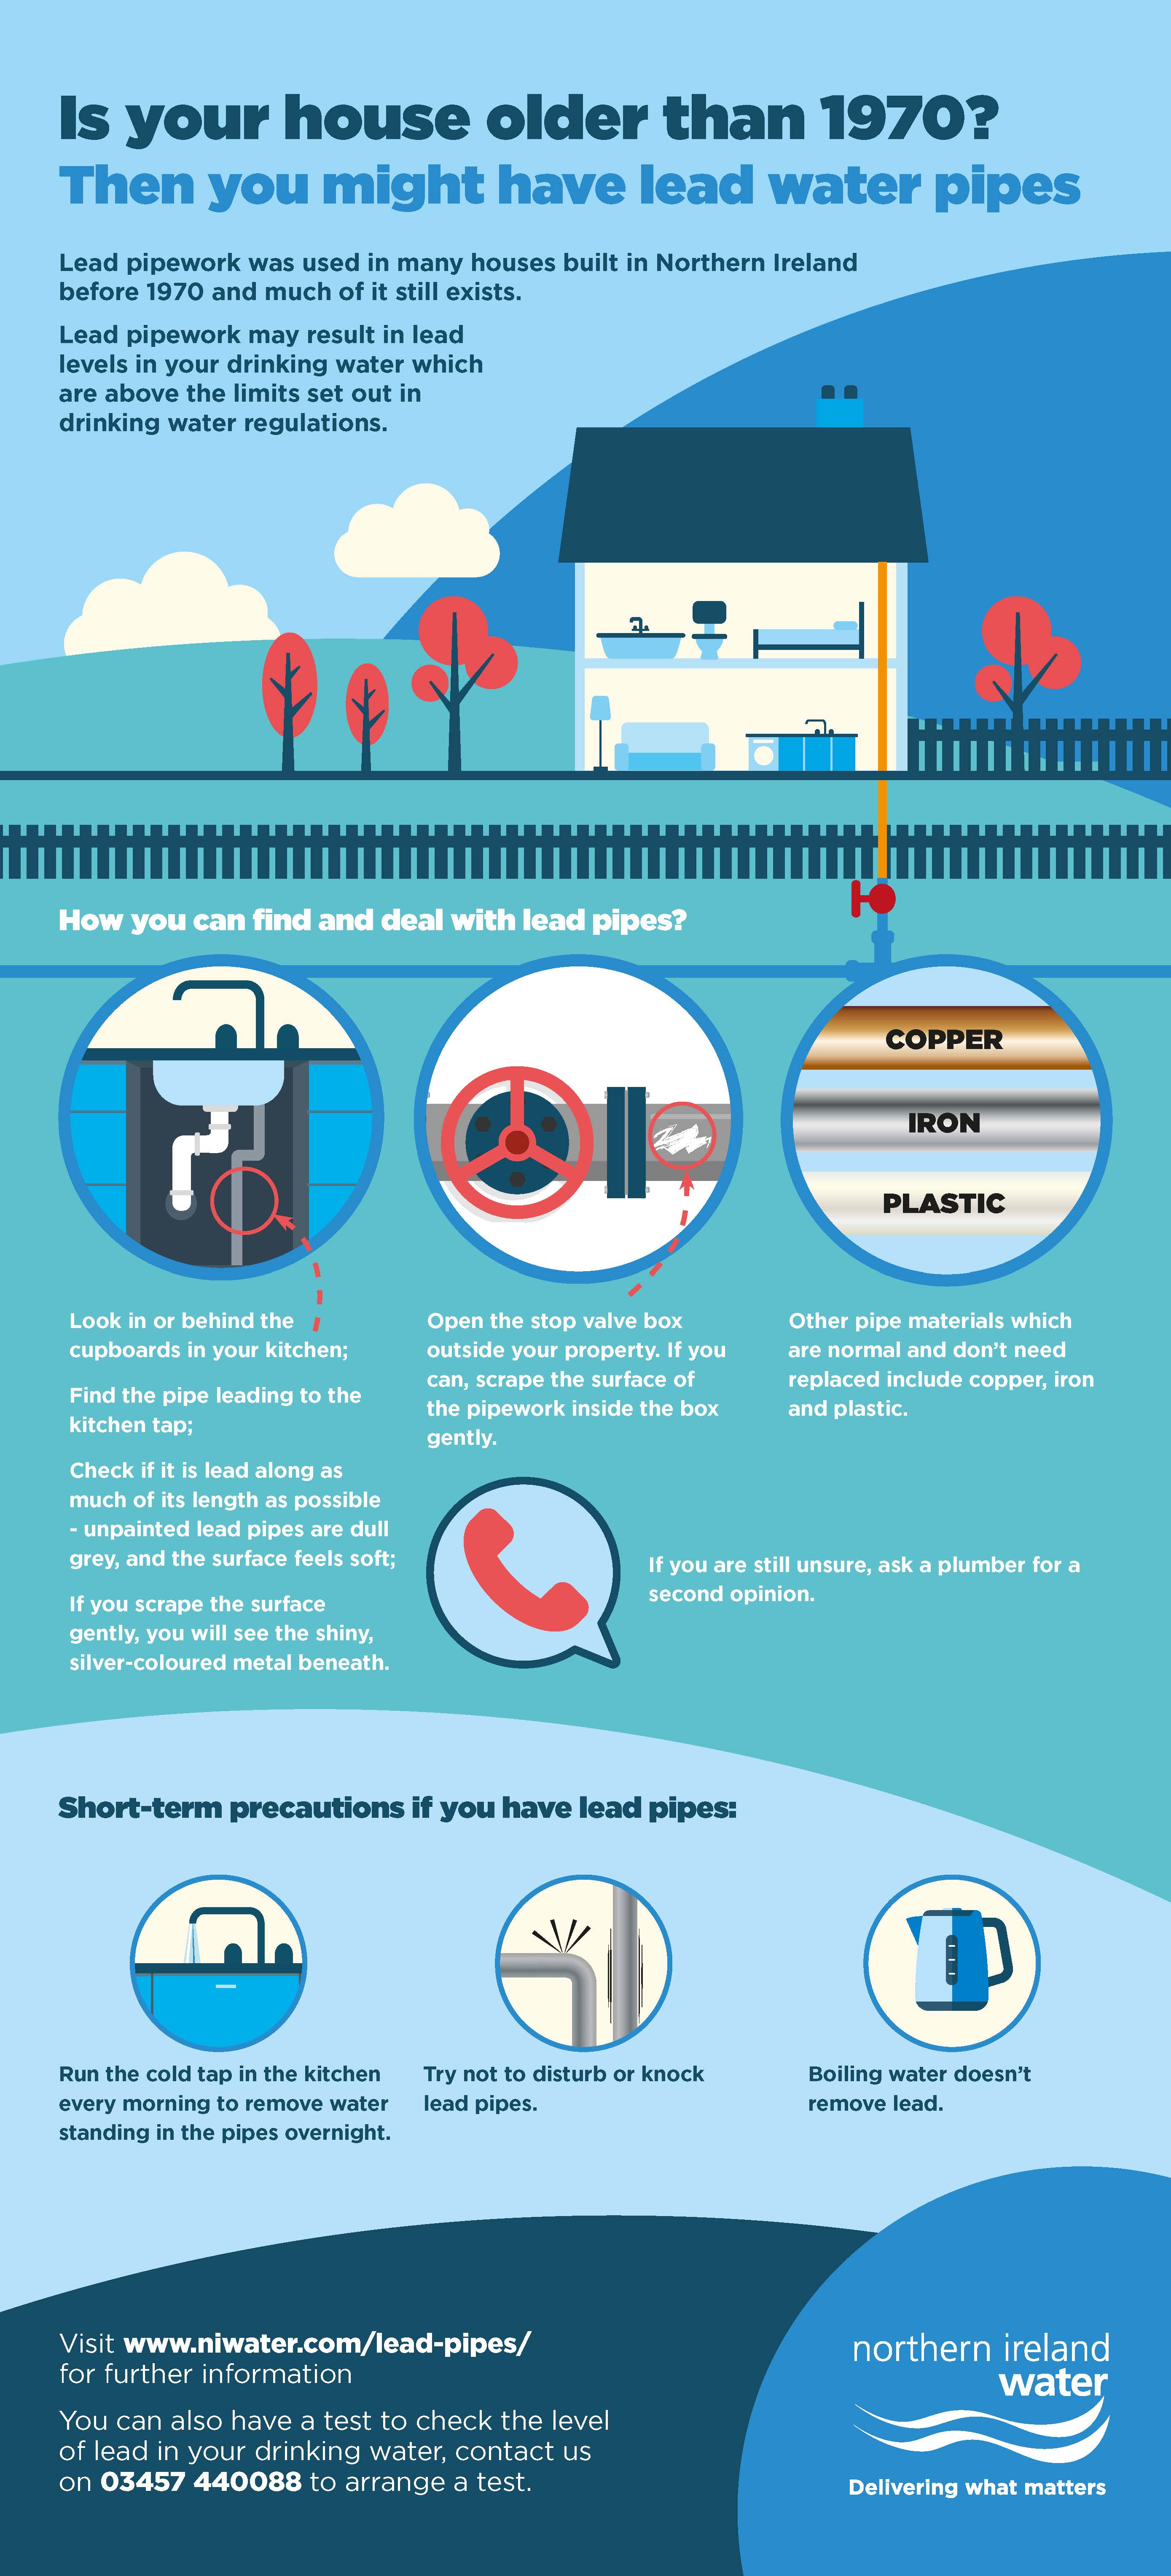 Infograpgic poster for lead pipework if house older than 1970 and what to look out for and short-term precautions